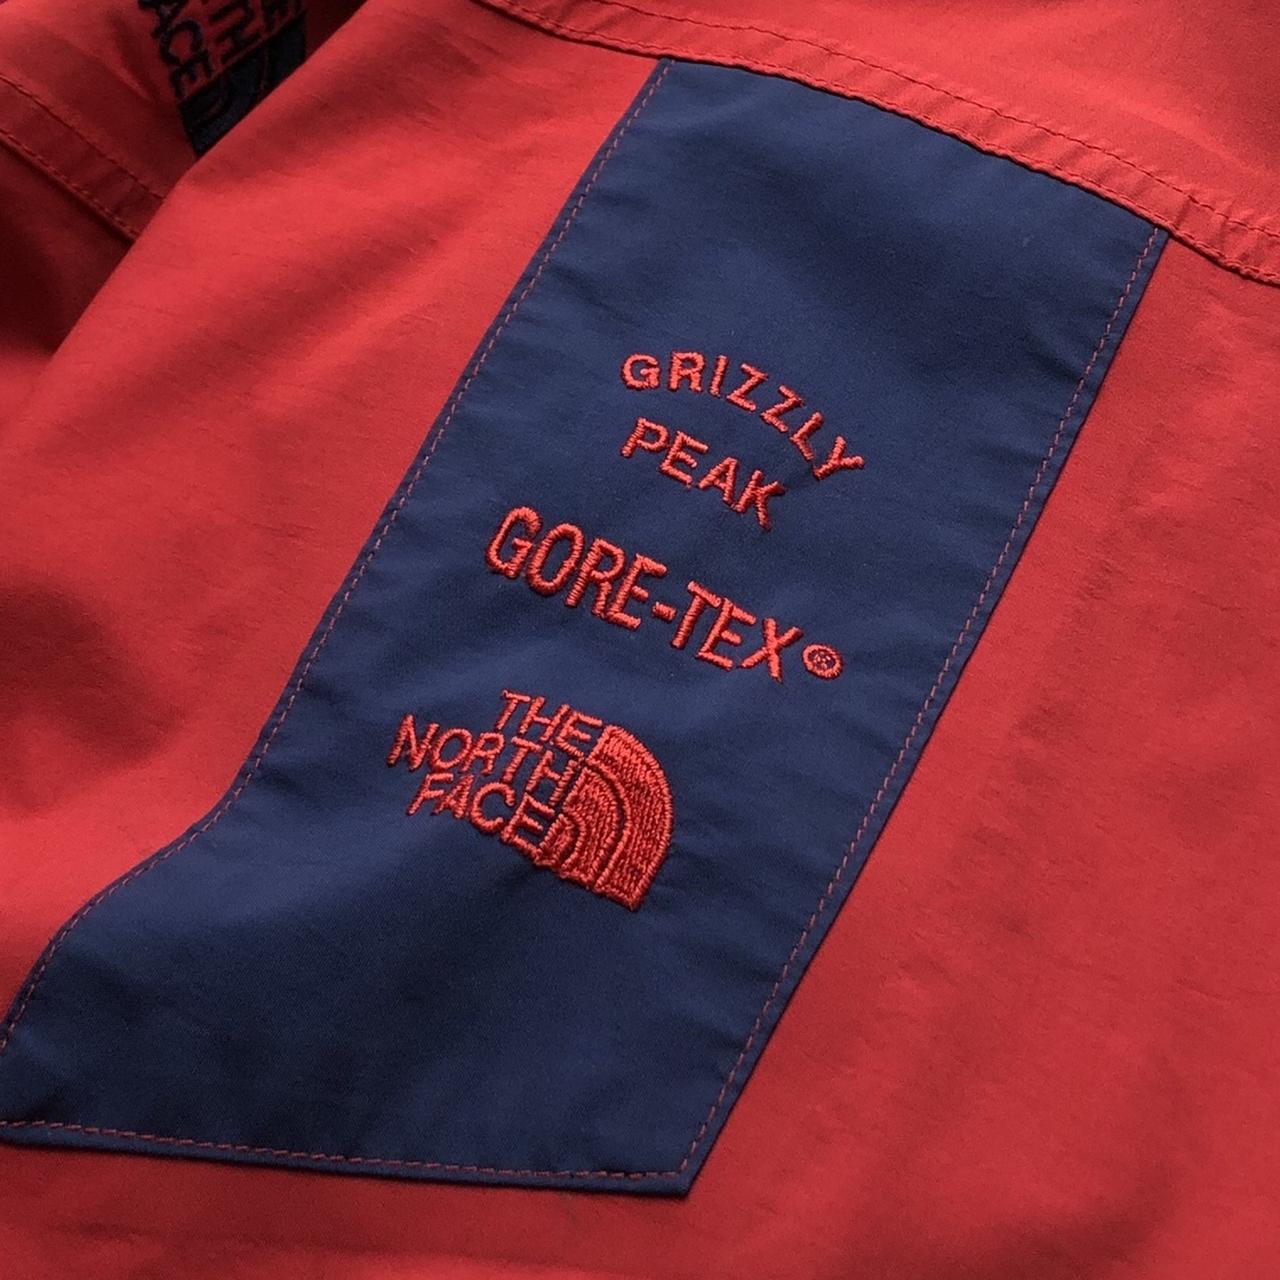 The North Face Gore-Tex Jacket “Grizzly Peak”, Very...